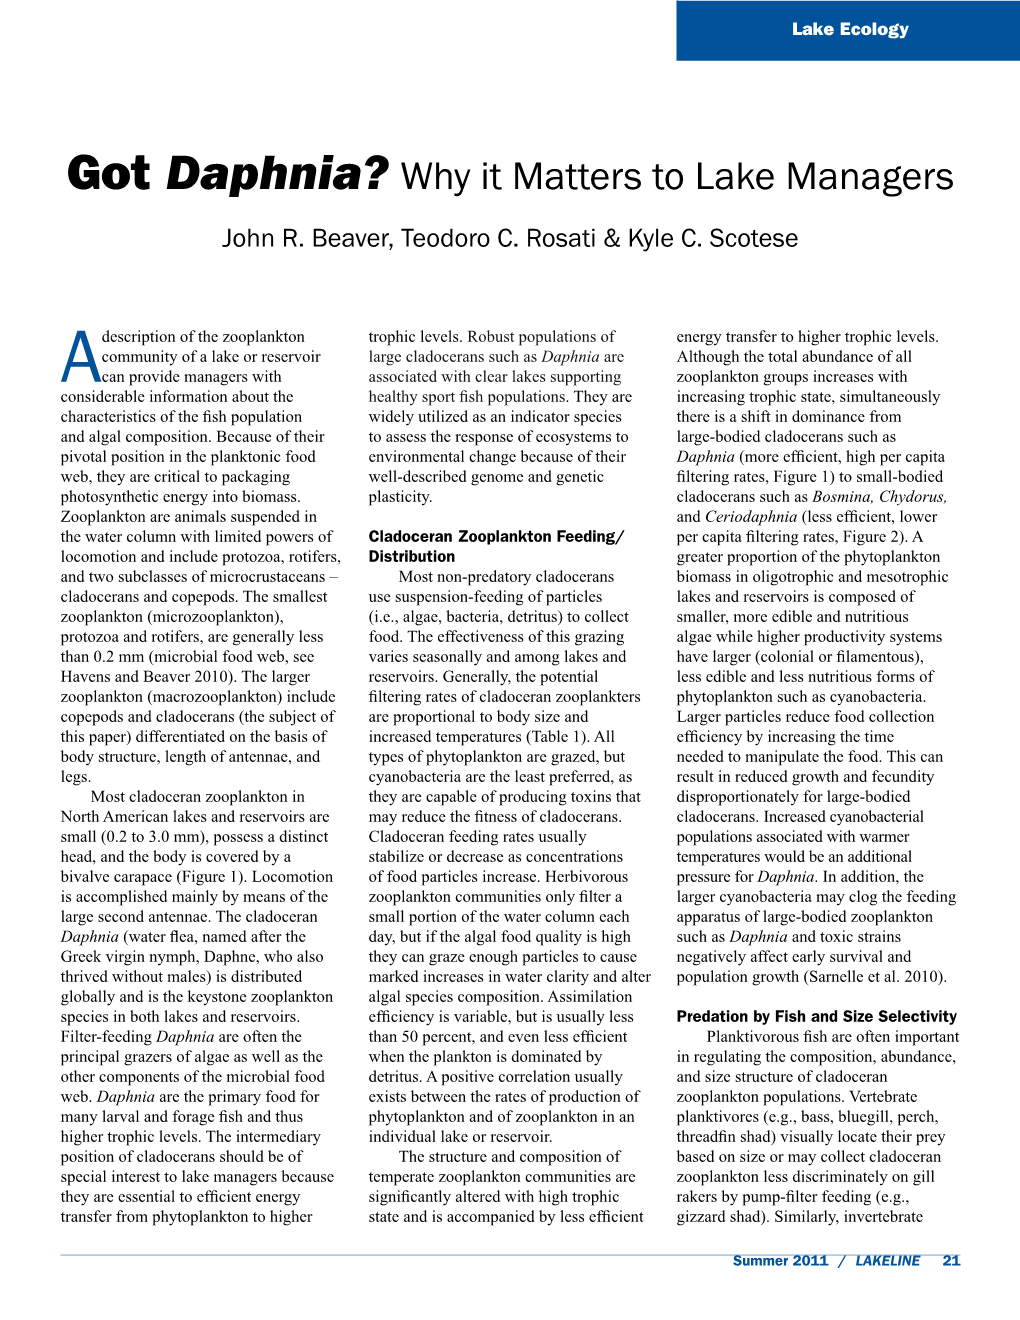 Got Daphnia? Why It Matters to Lake Managers John R